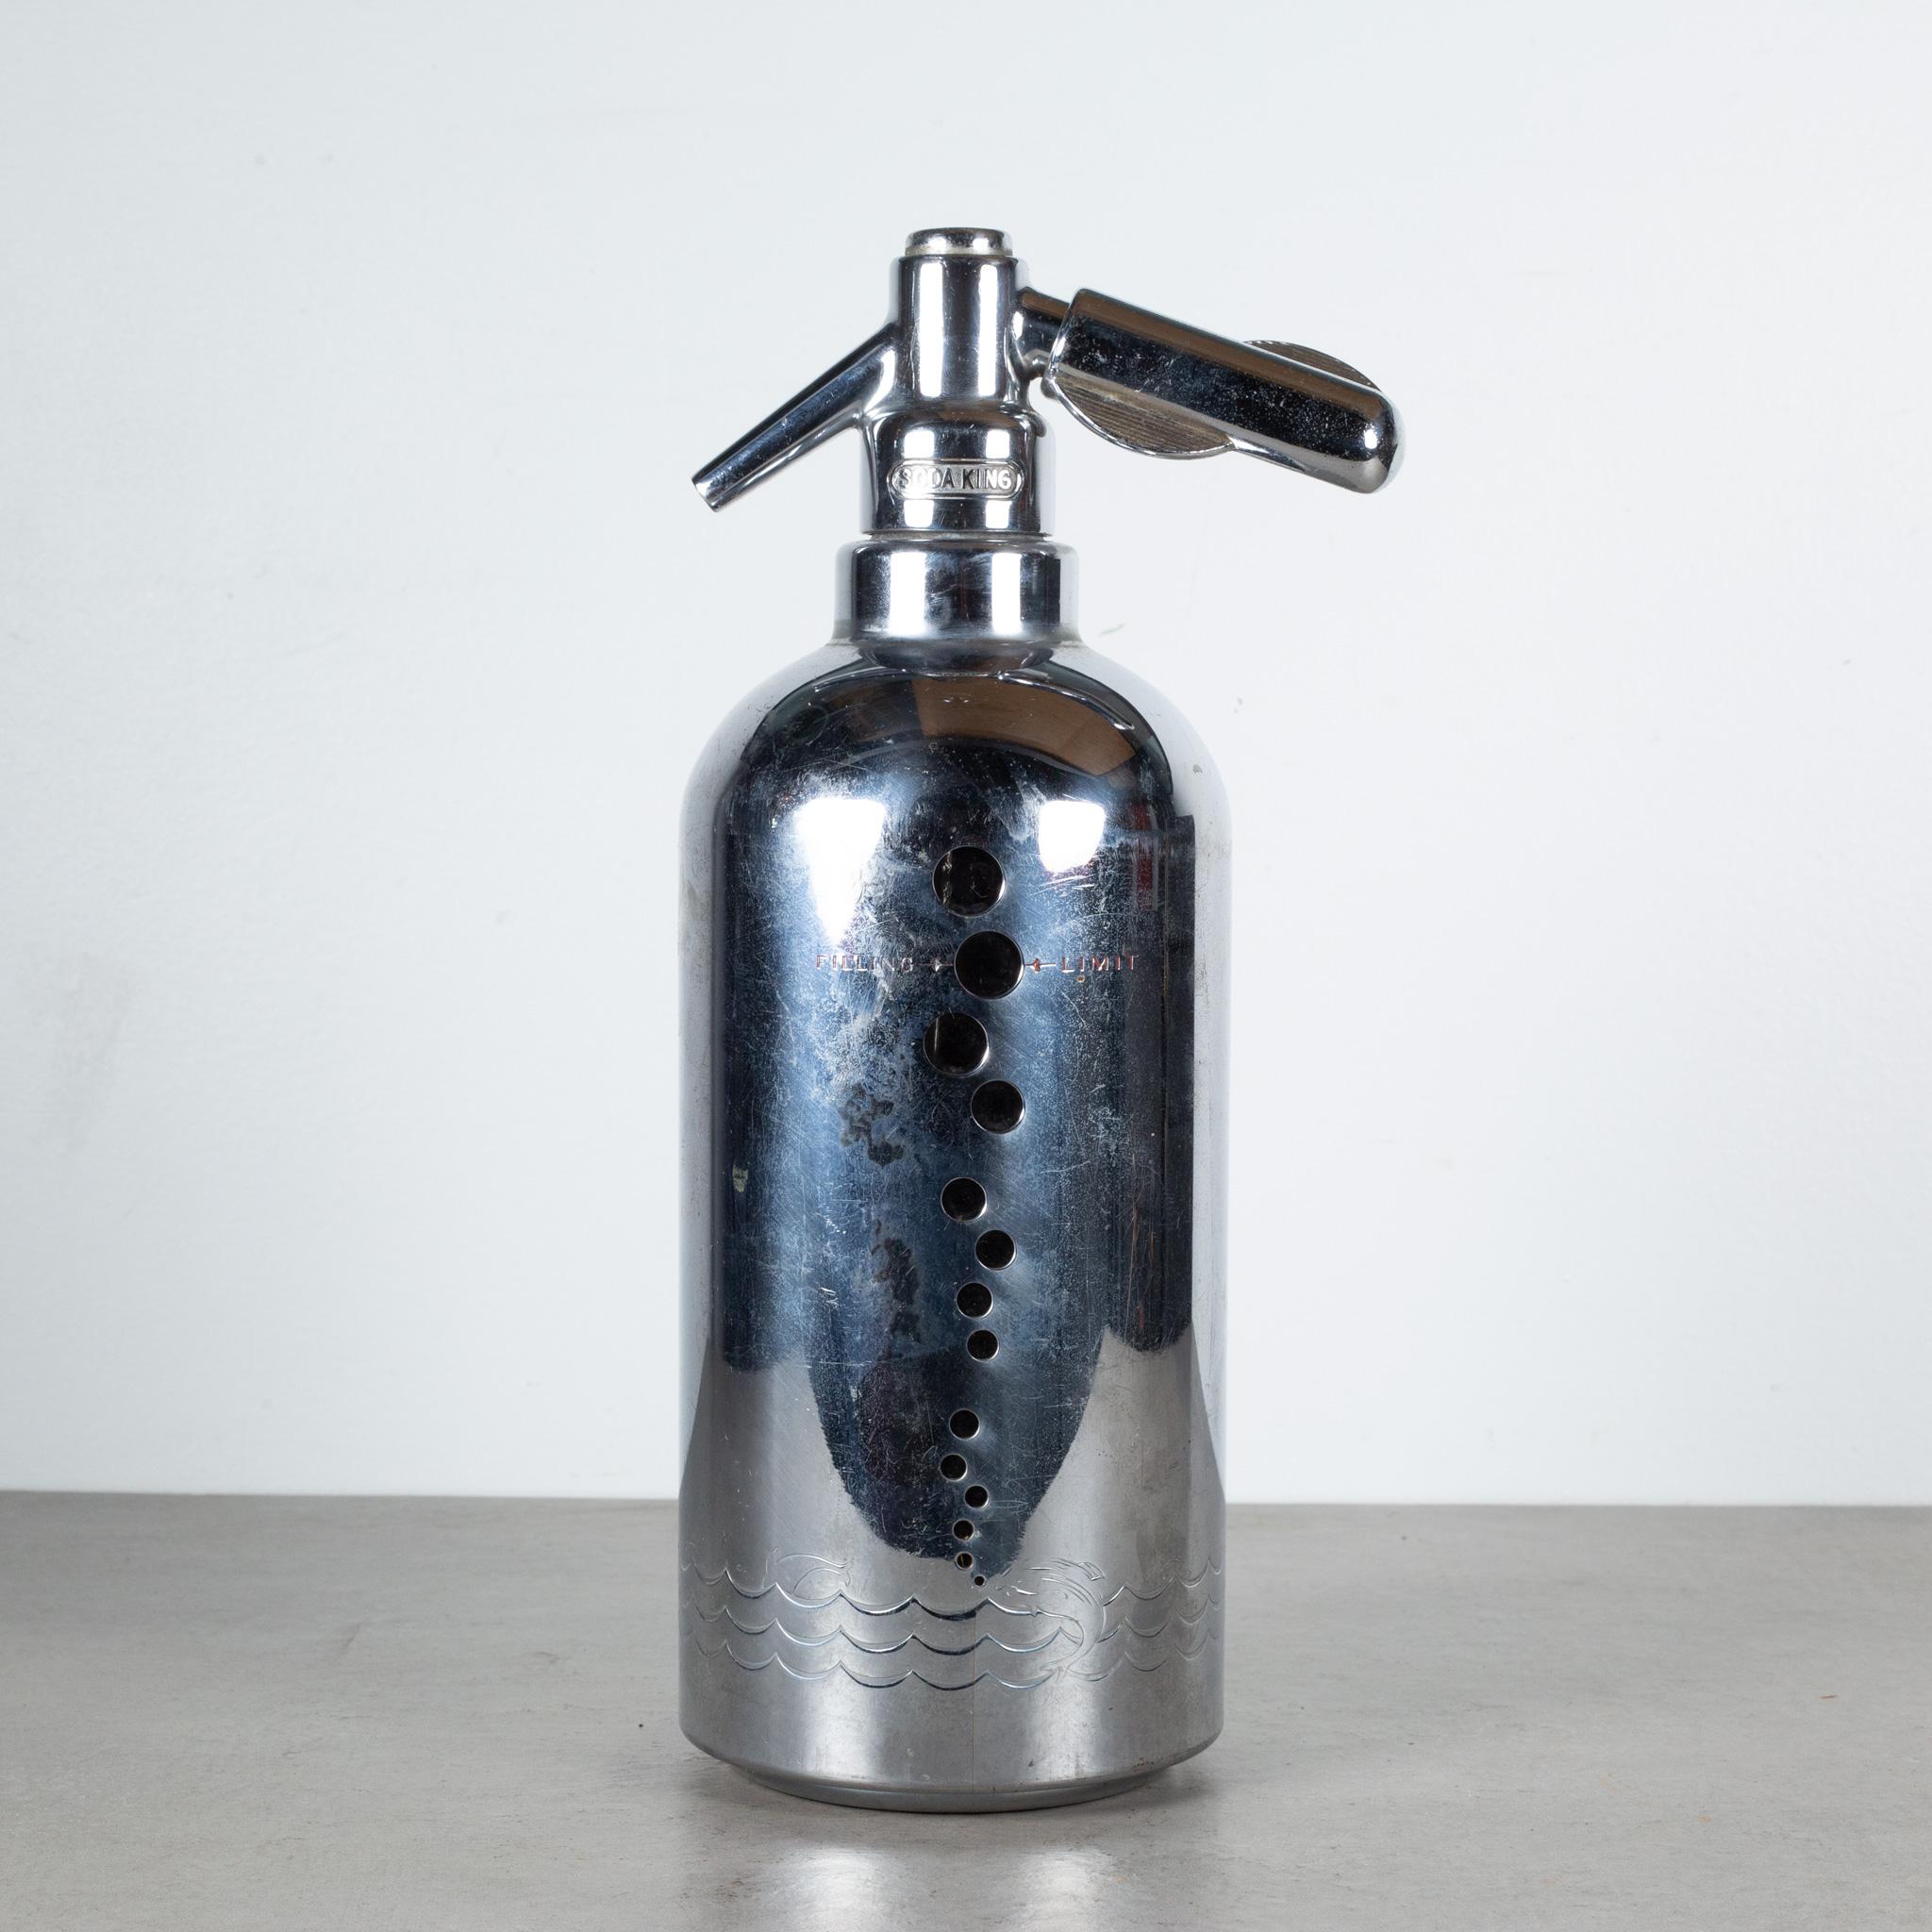 ABOUT

An original Art Deco Soda King seltzer syphon. The thick glass bottle has a chrome sleeve with bubble cut outs and whales, dolphins and waves etched on the bottom. The bottle has the complete mechanisms including the charger holder. This